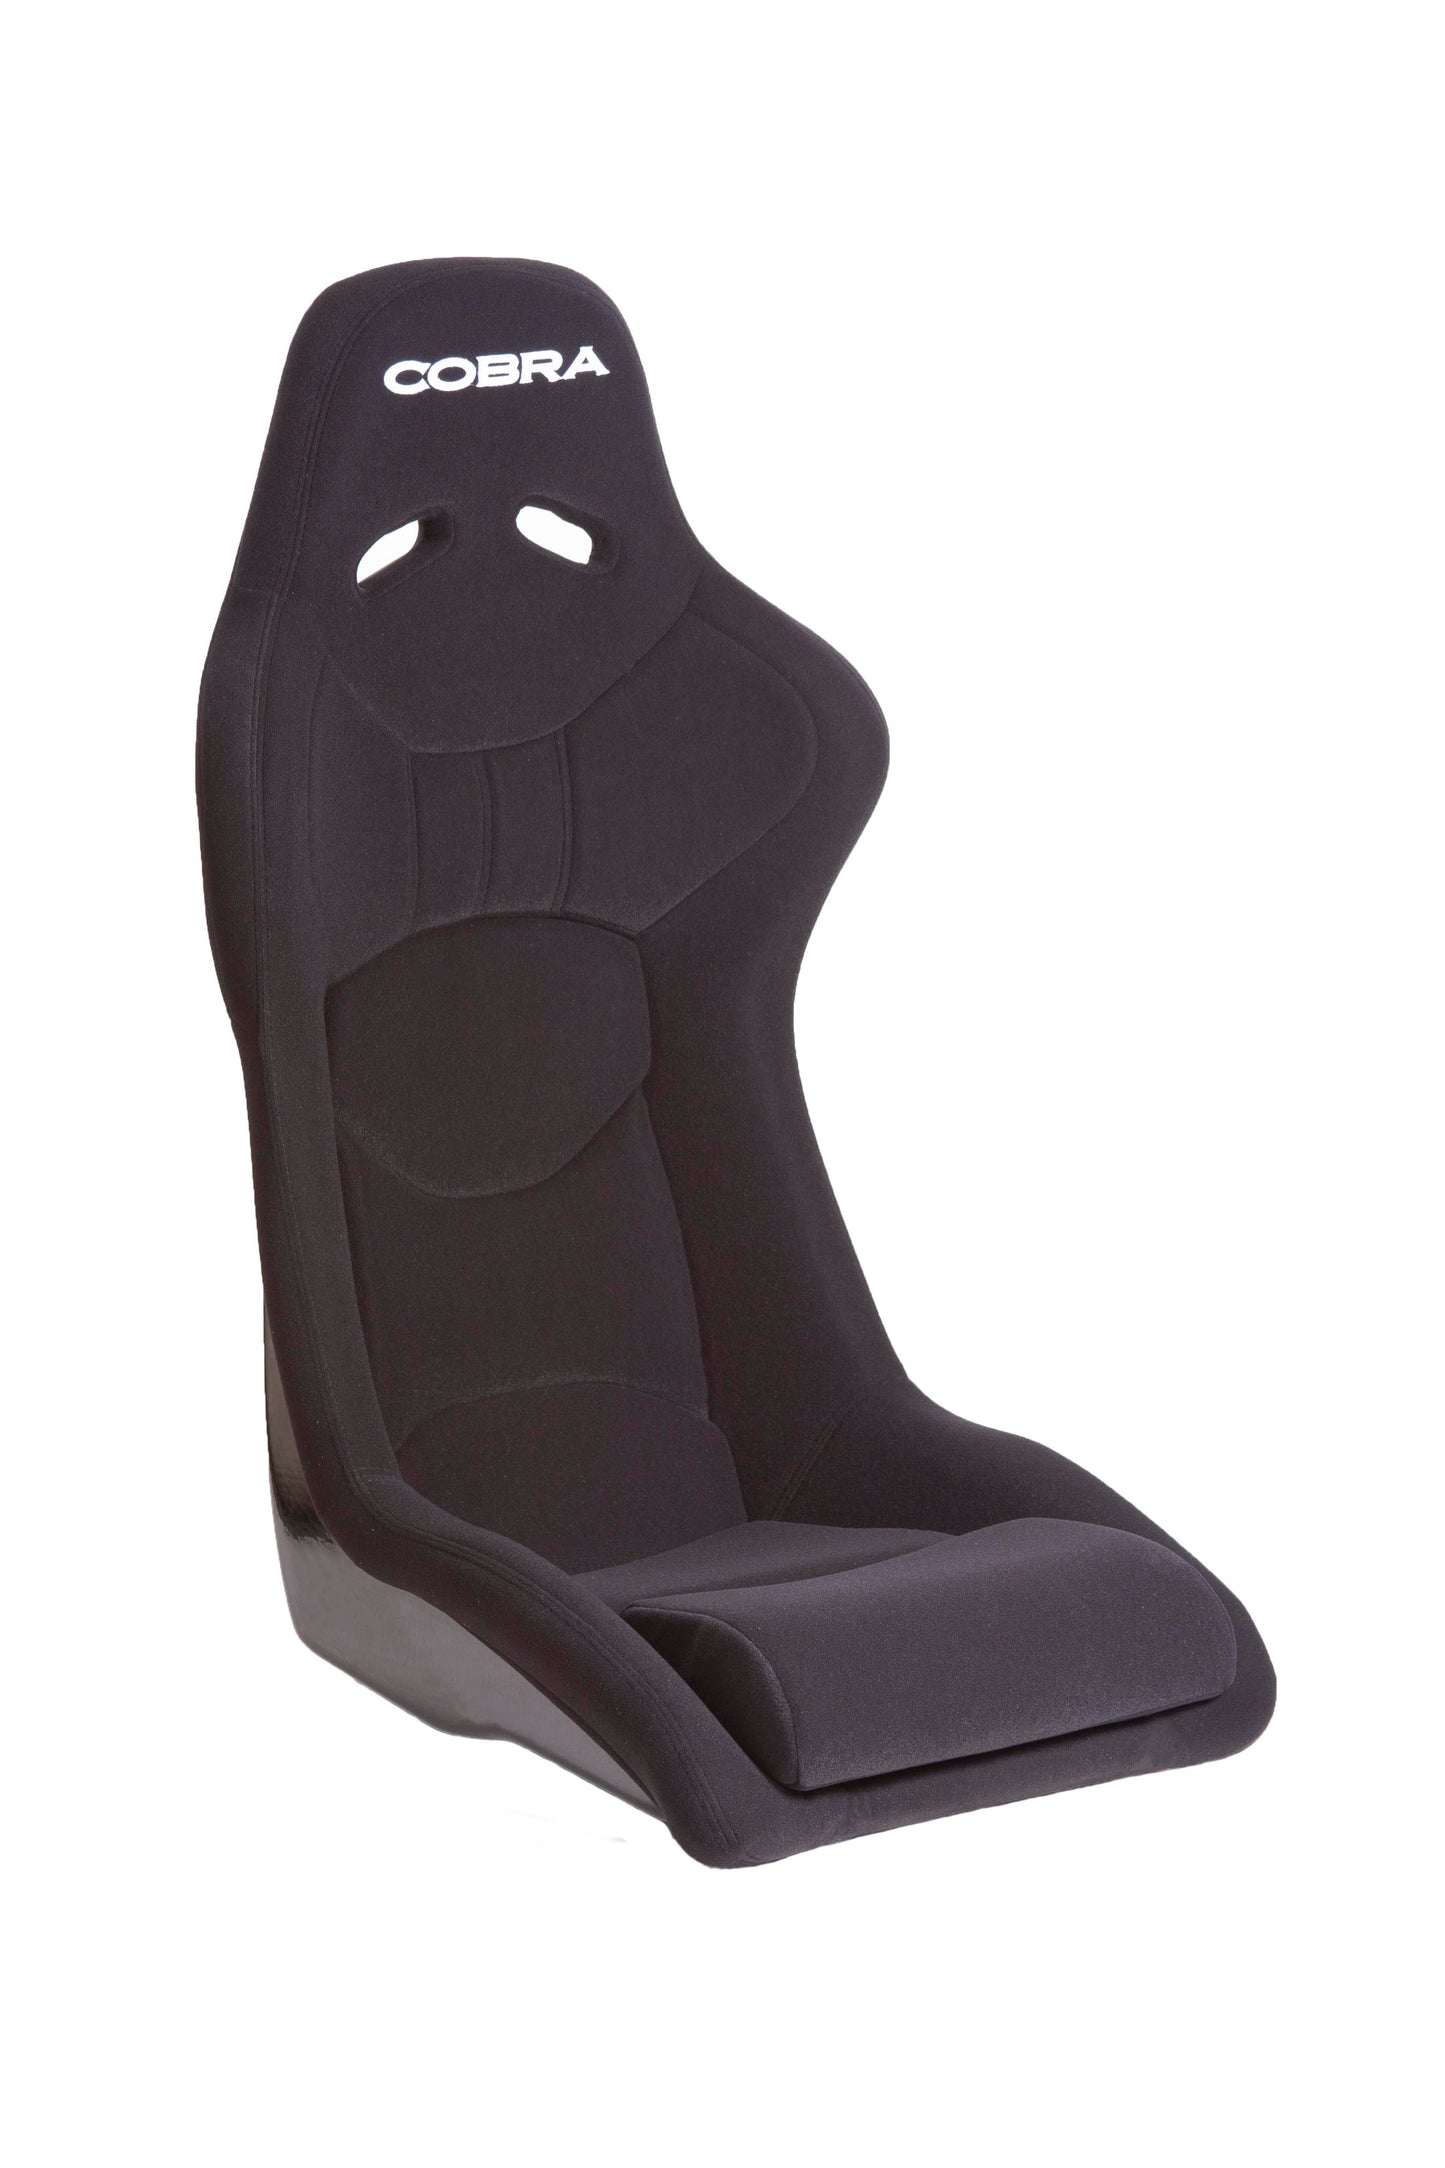 Offside front view of a black Cobra Nogaro Club Sports seat with the Cobra name in white, on the headrest